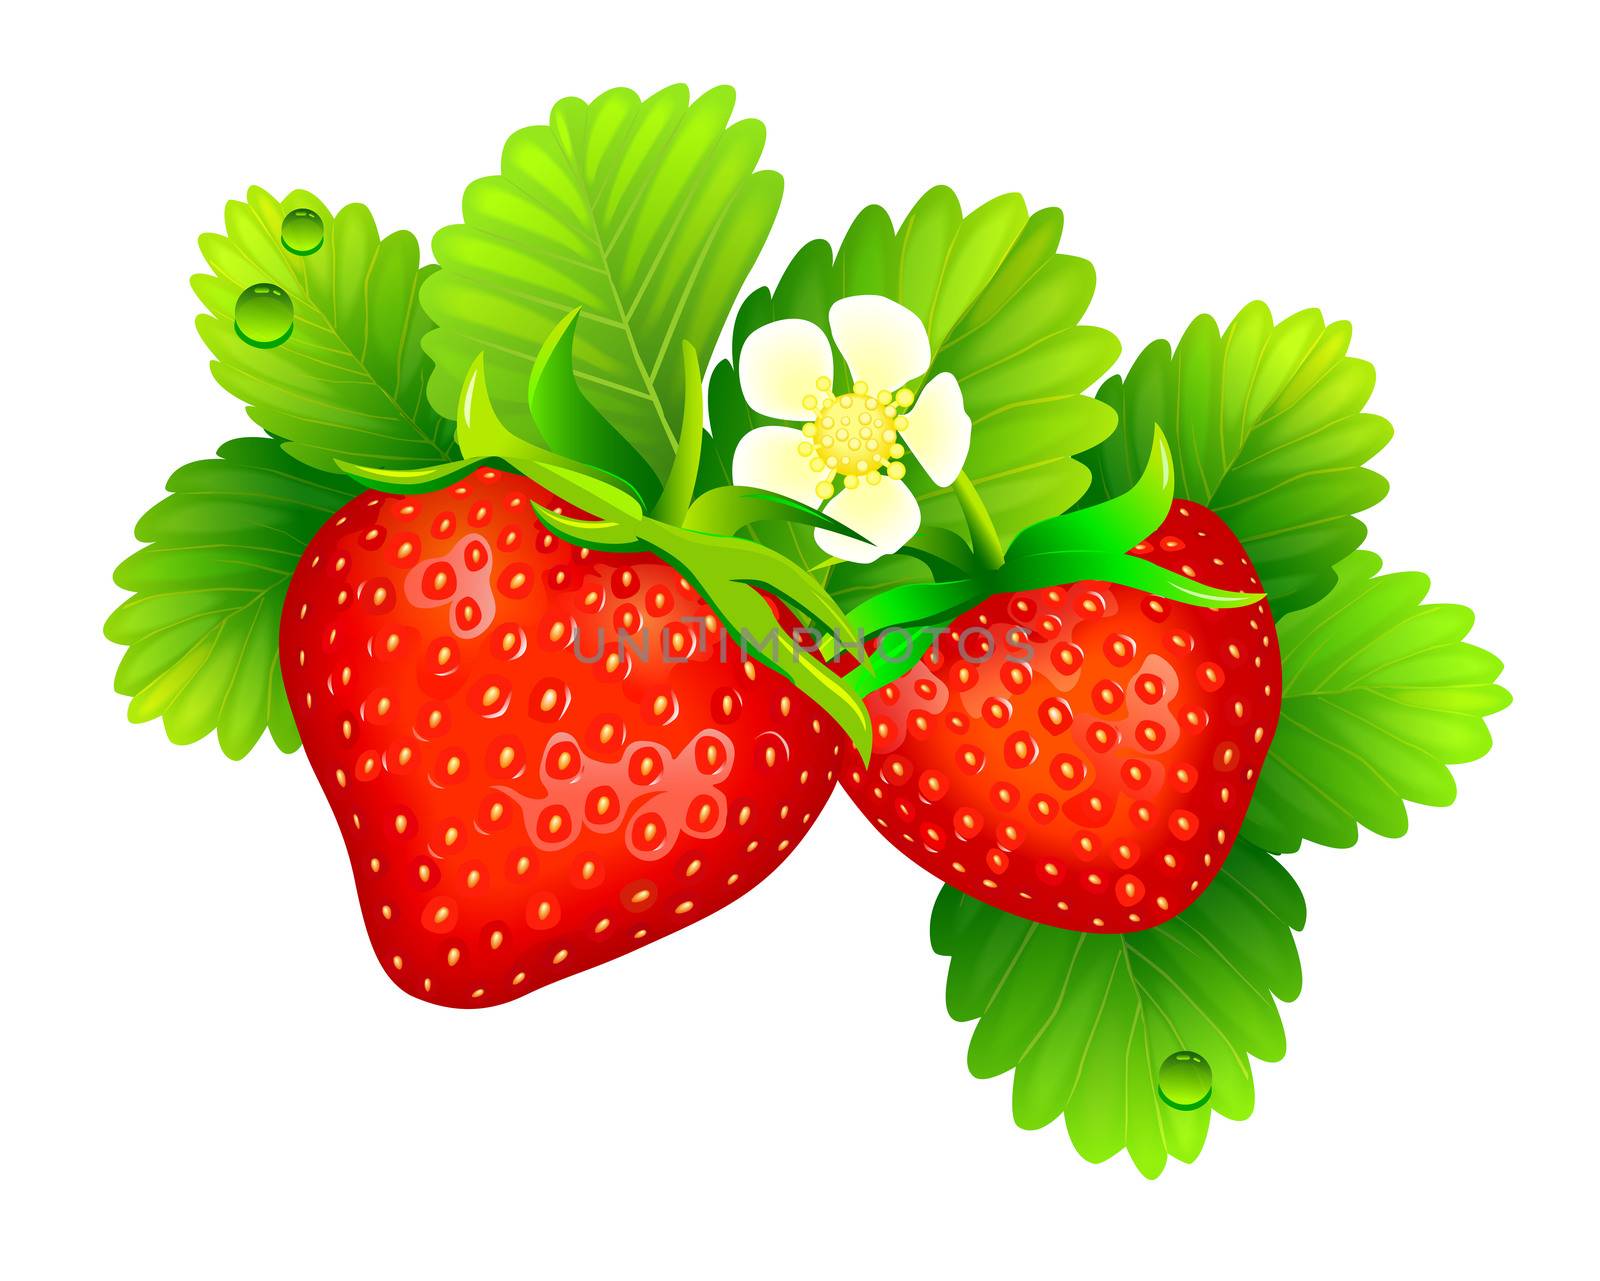 Strawberry with leaves on a white background. A strawberry bush on a white background. 